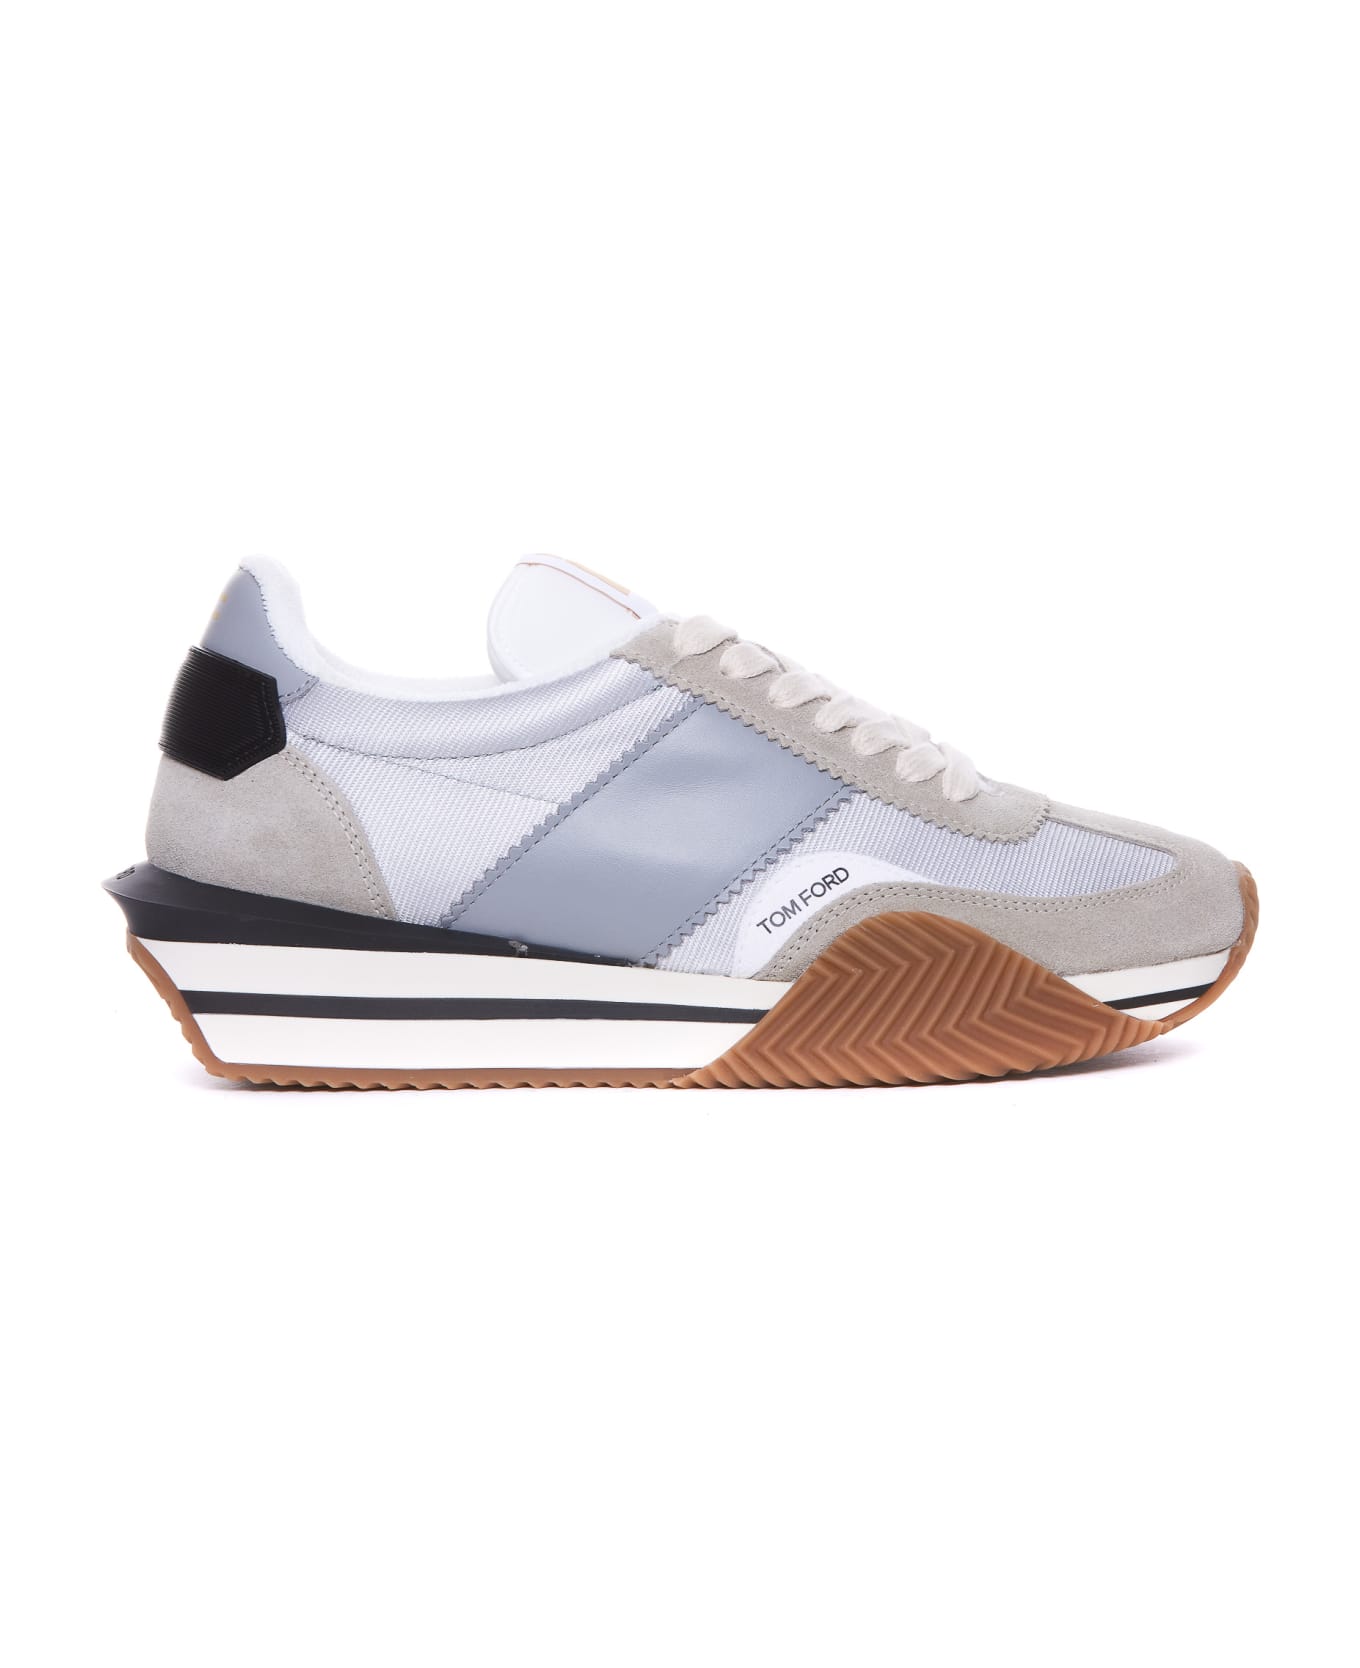 Tom Ford James Sneakers - Silver スニーカー